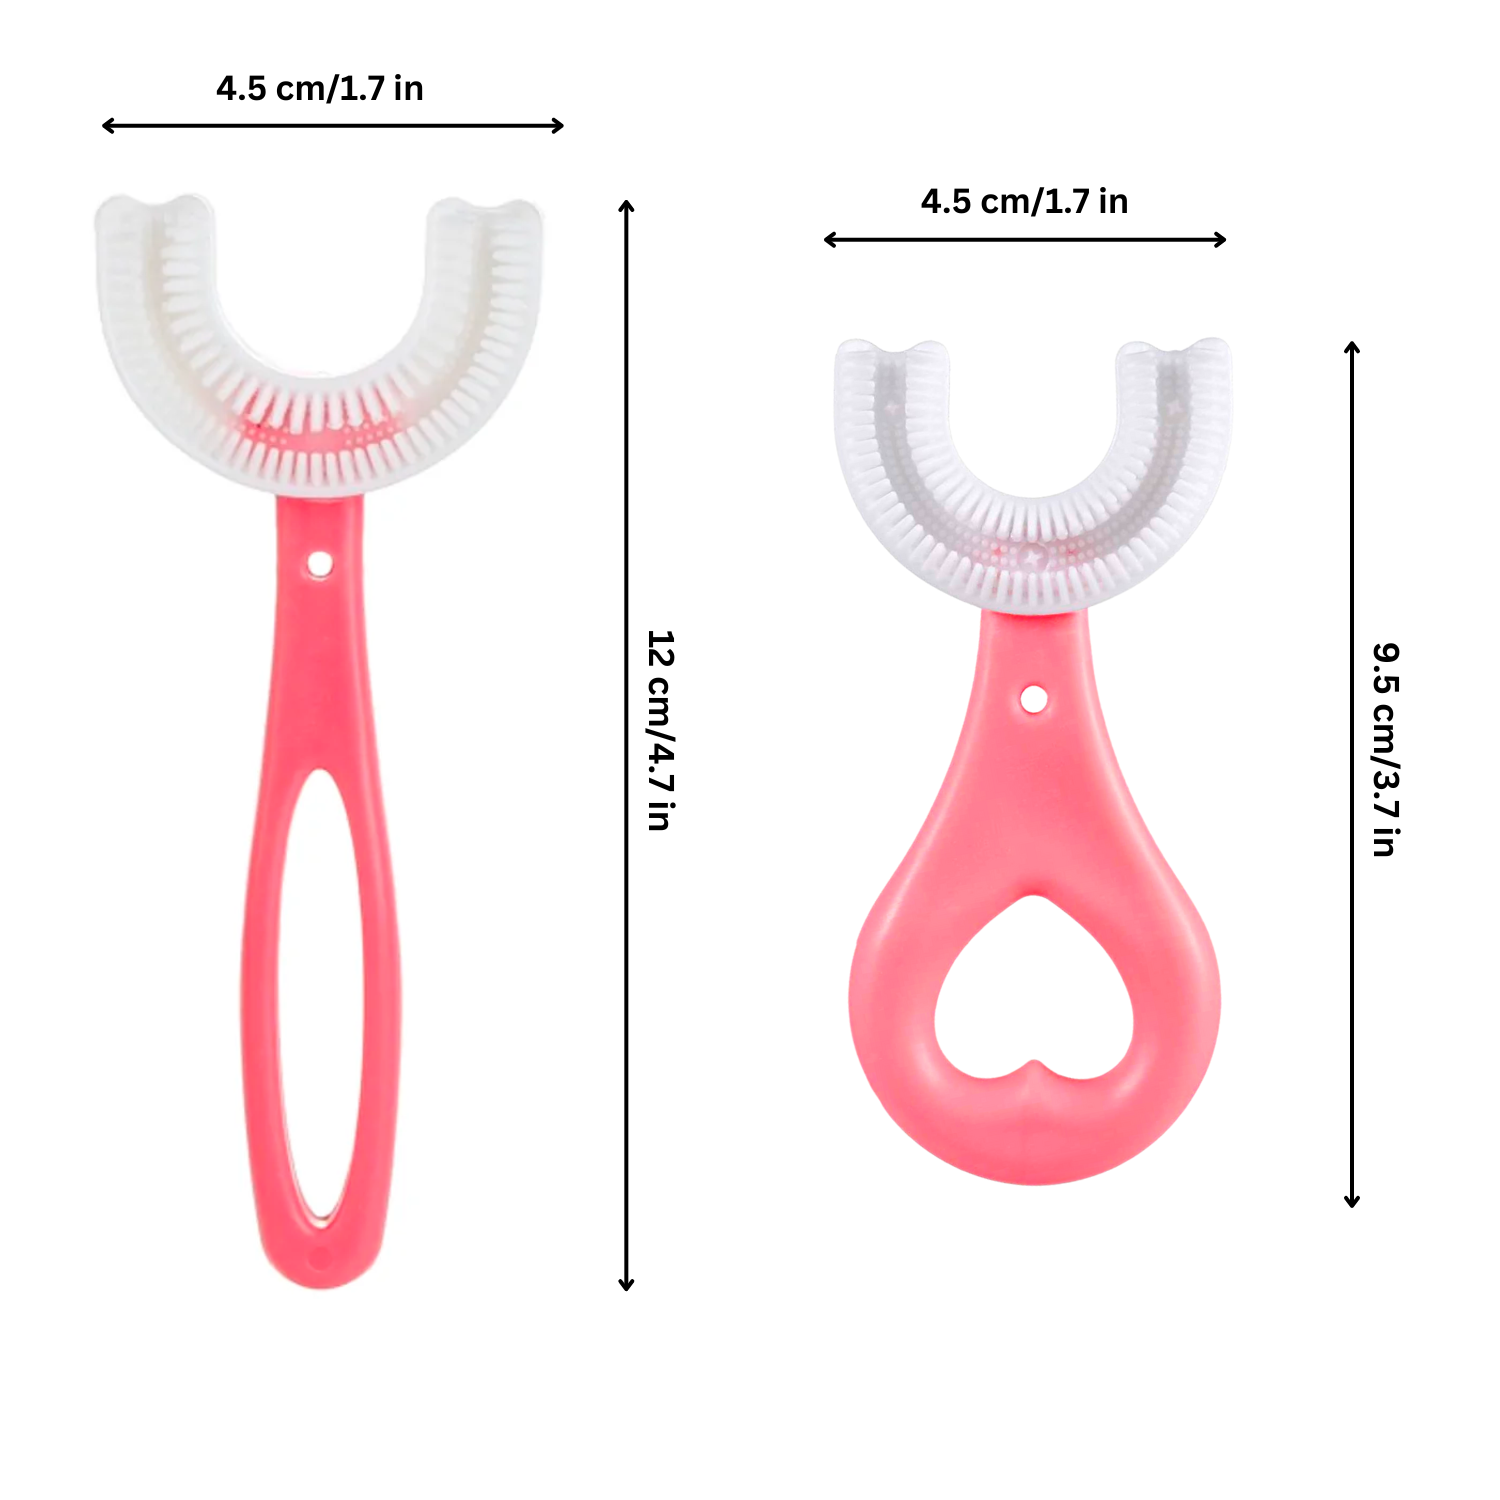 360° Oral Teeth Cleaning Design for Toddlers and Children